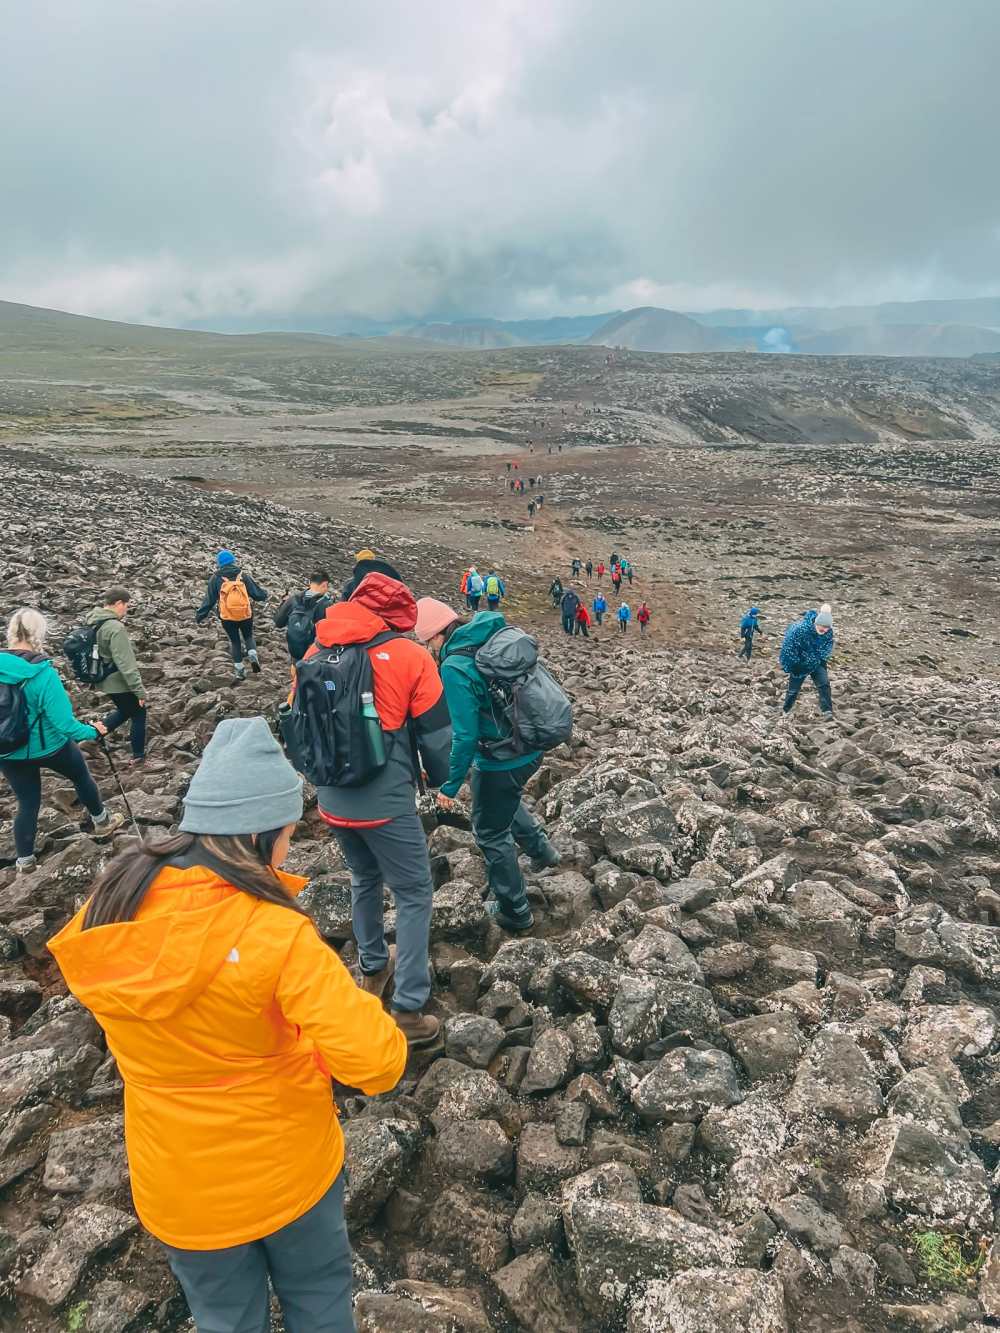 Hiking To An Active Volcano Eruption In Iceland (Near Reykjavik)